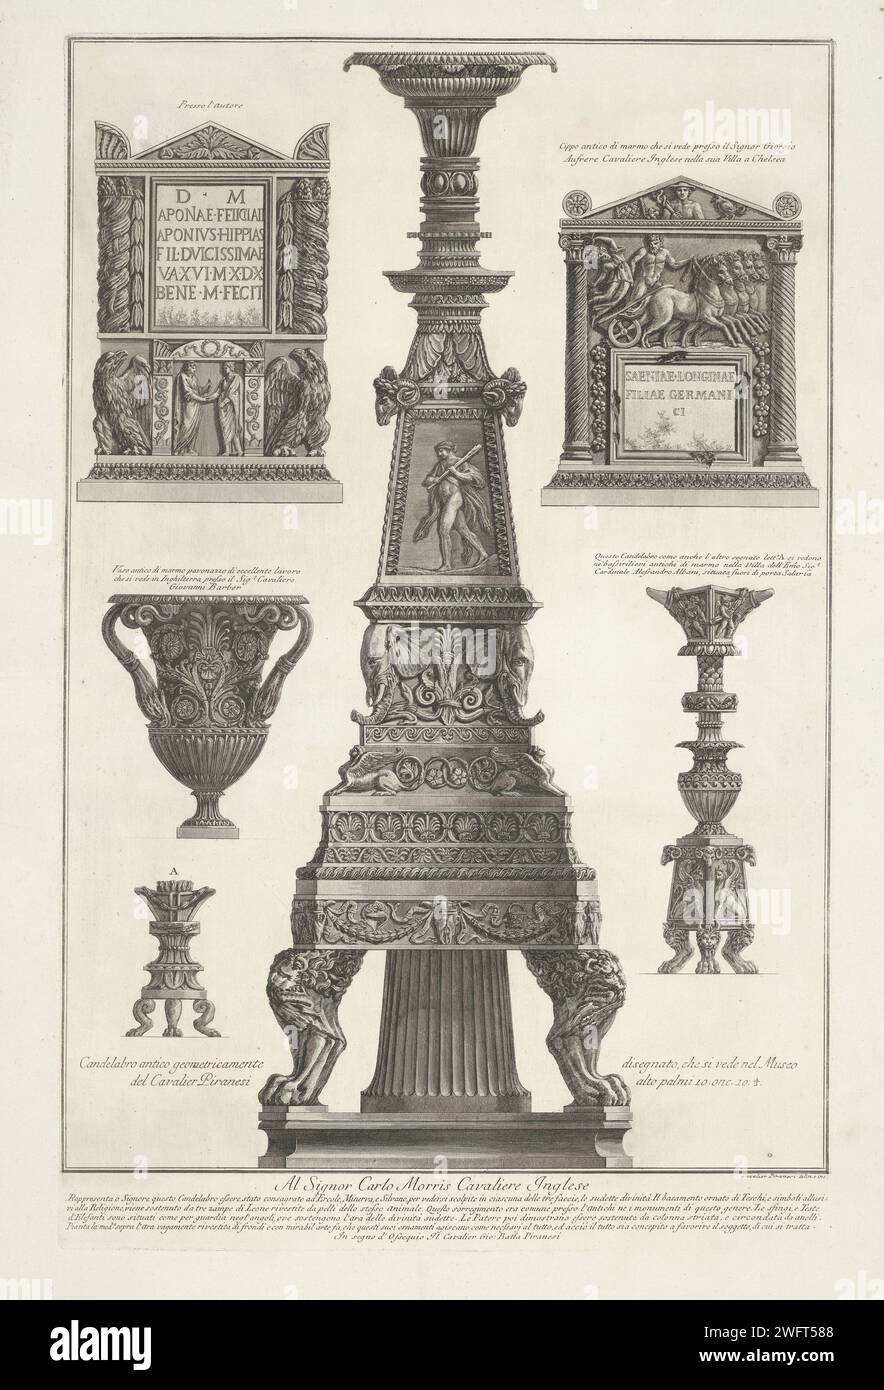 Kandelabers, Grafzuilen en vas, Giovanni Battista Piranesi, 1778 print Antique candelabers, burial columns and an ornamental vase. Captions for the various performances. Assignment in the end margin. Rome paper etching vase  ornament Stock Photo